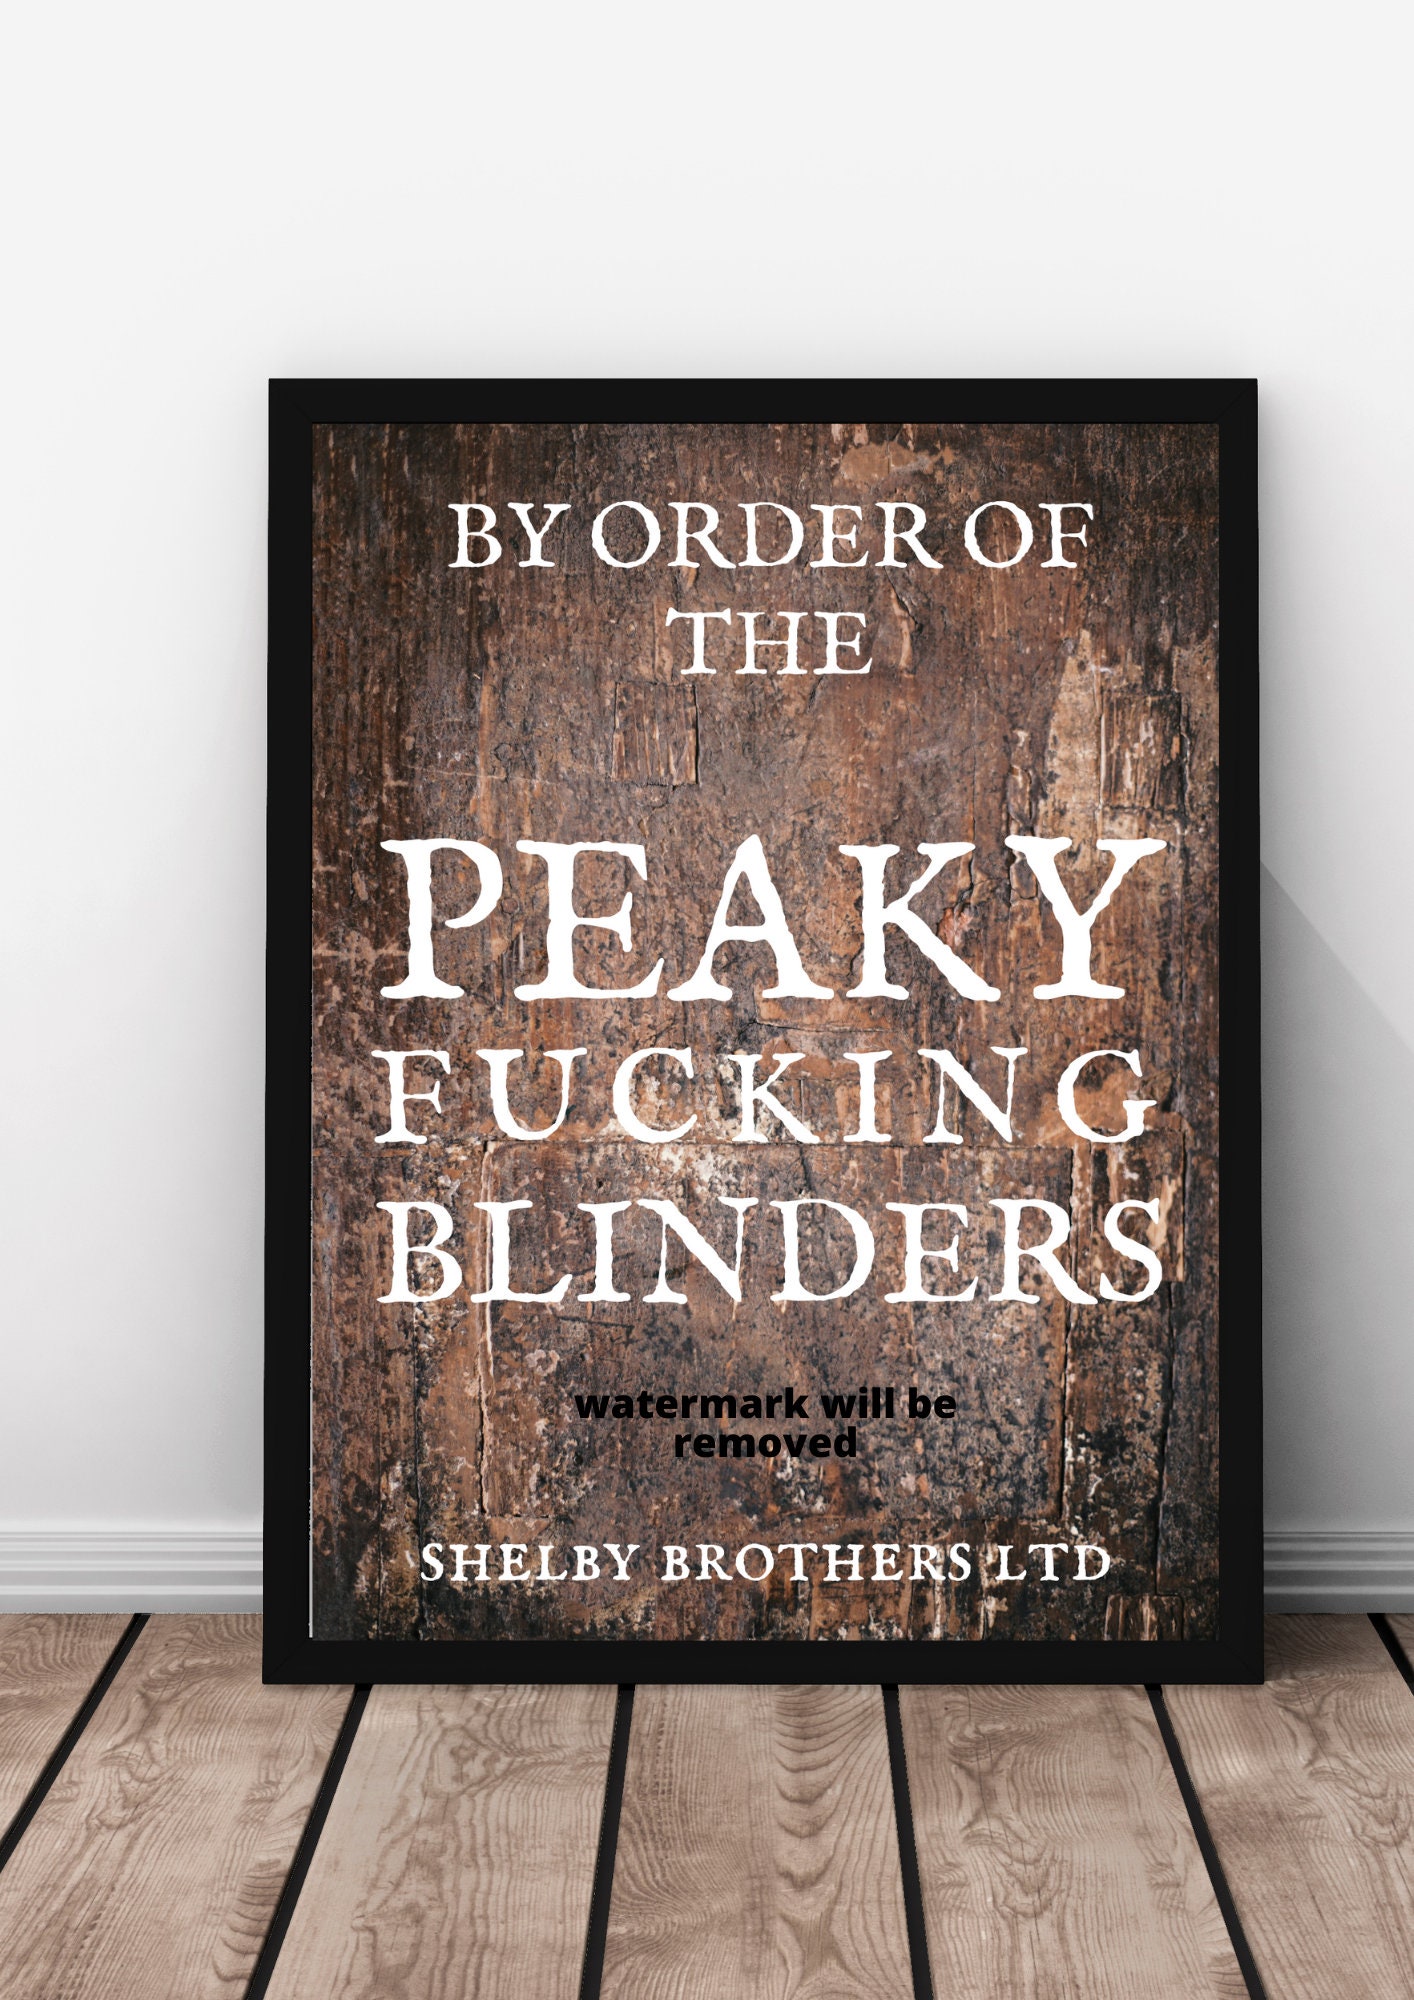 Peaky Blinders Inspired Birthday/ Event/ Party - Personalised invitations -  Themed Party - Digital Prints - pdf